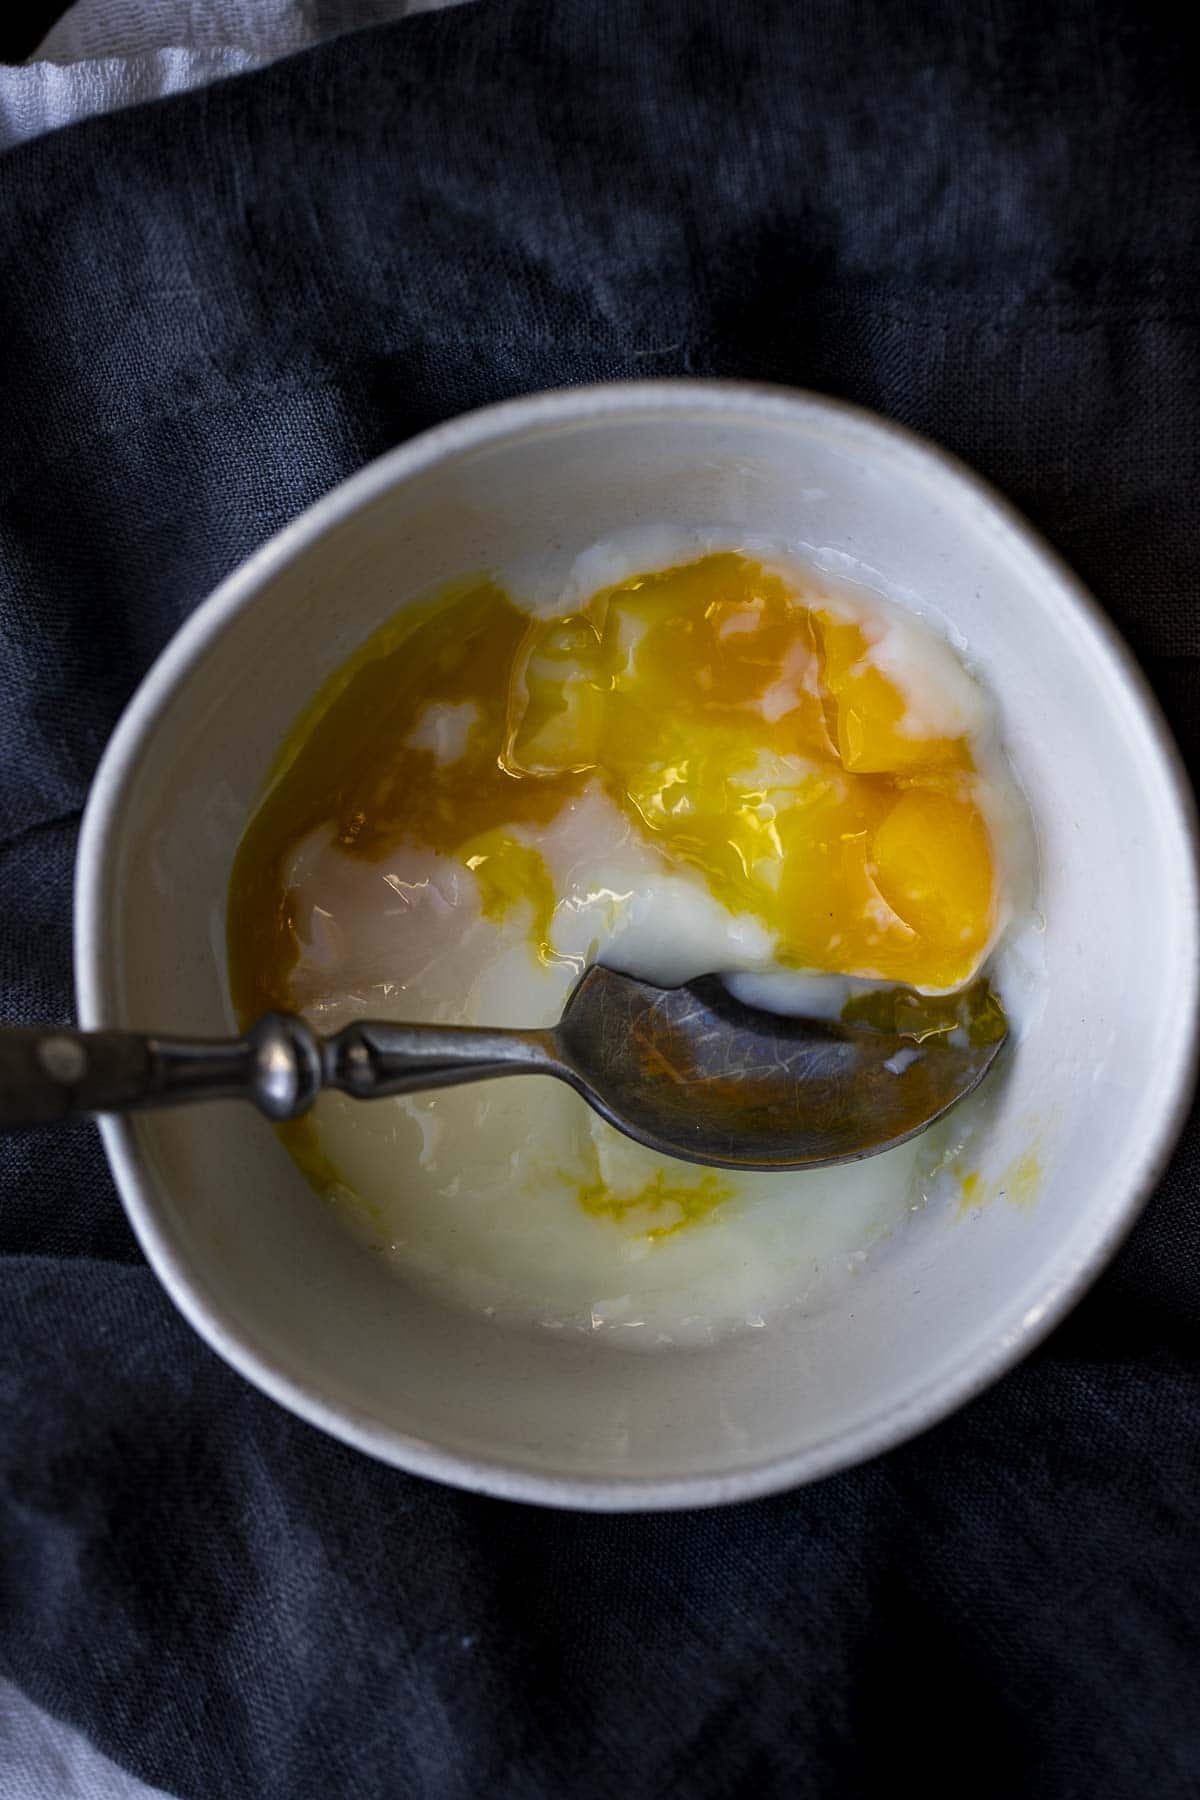 https://www.wenthere8this.com/wp-content/uploads/2021/06/sous-vide-poached-eggs-6.jpg